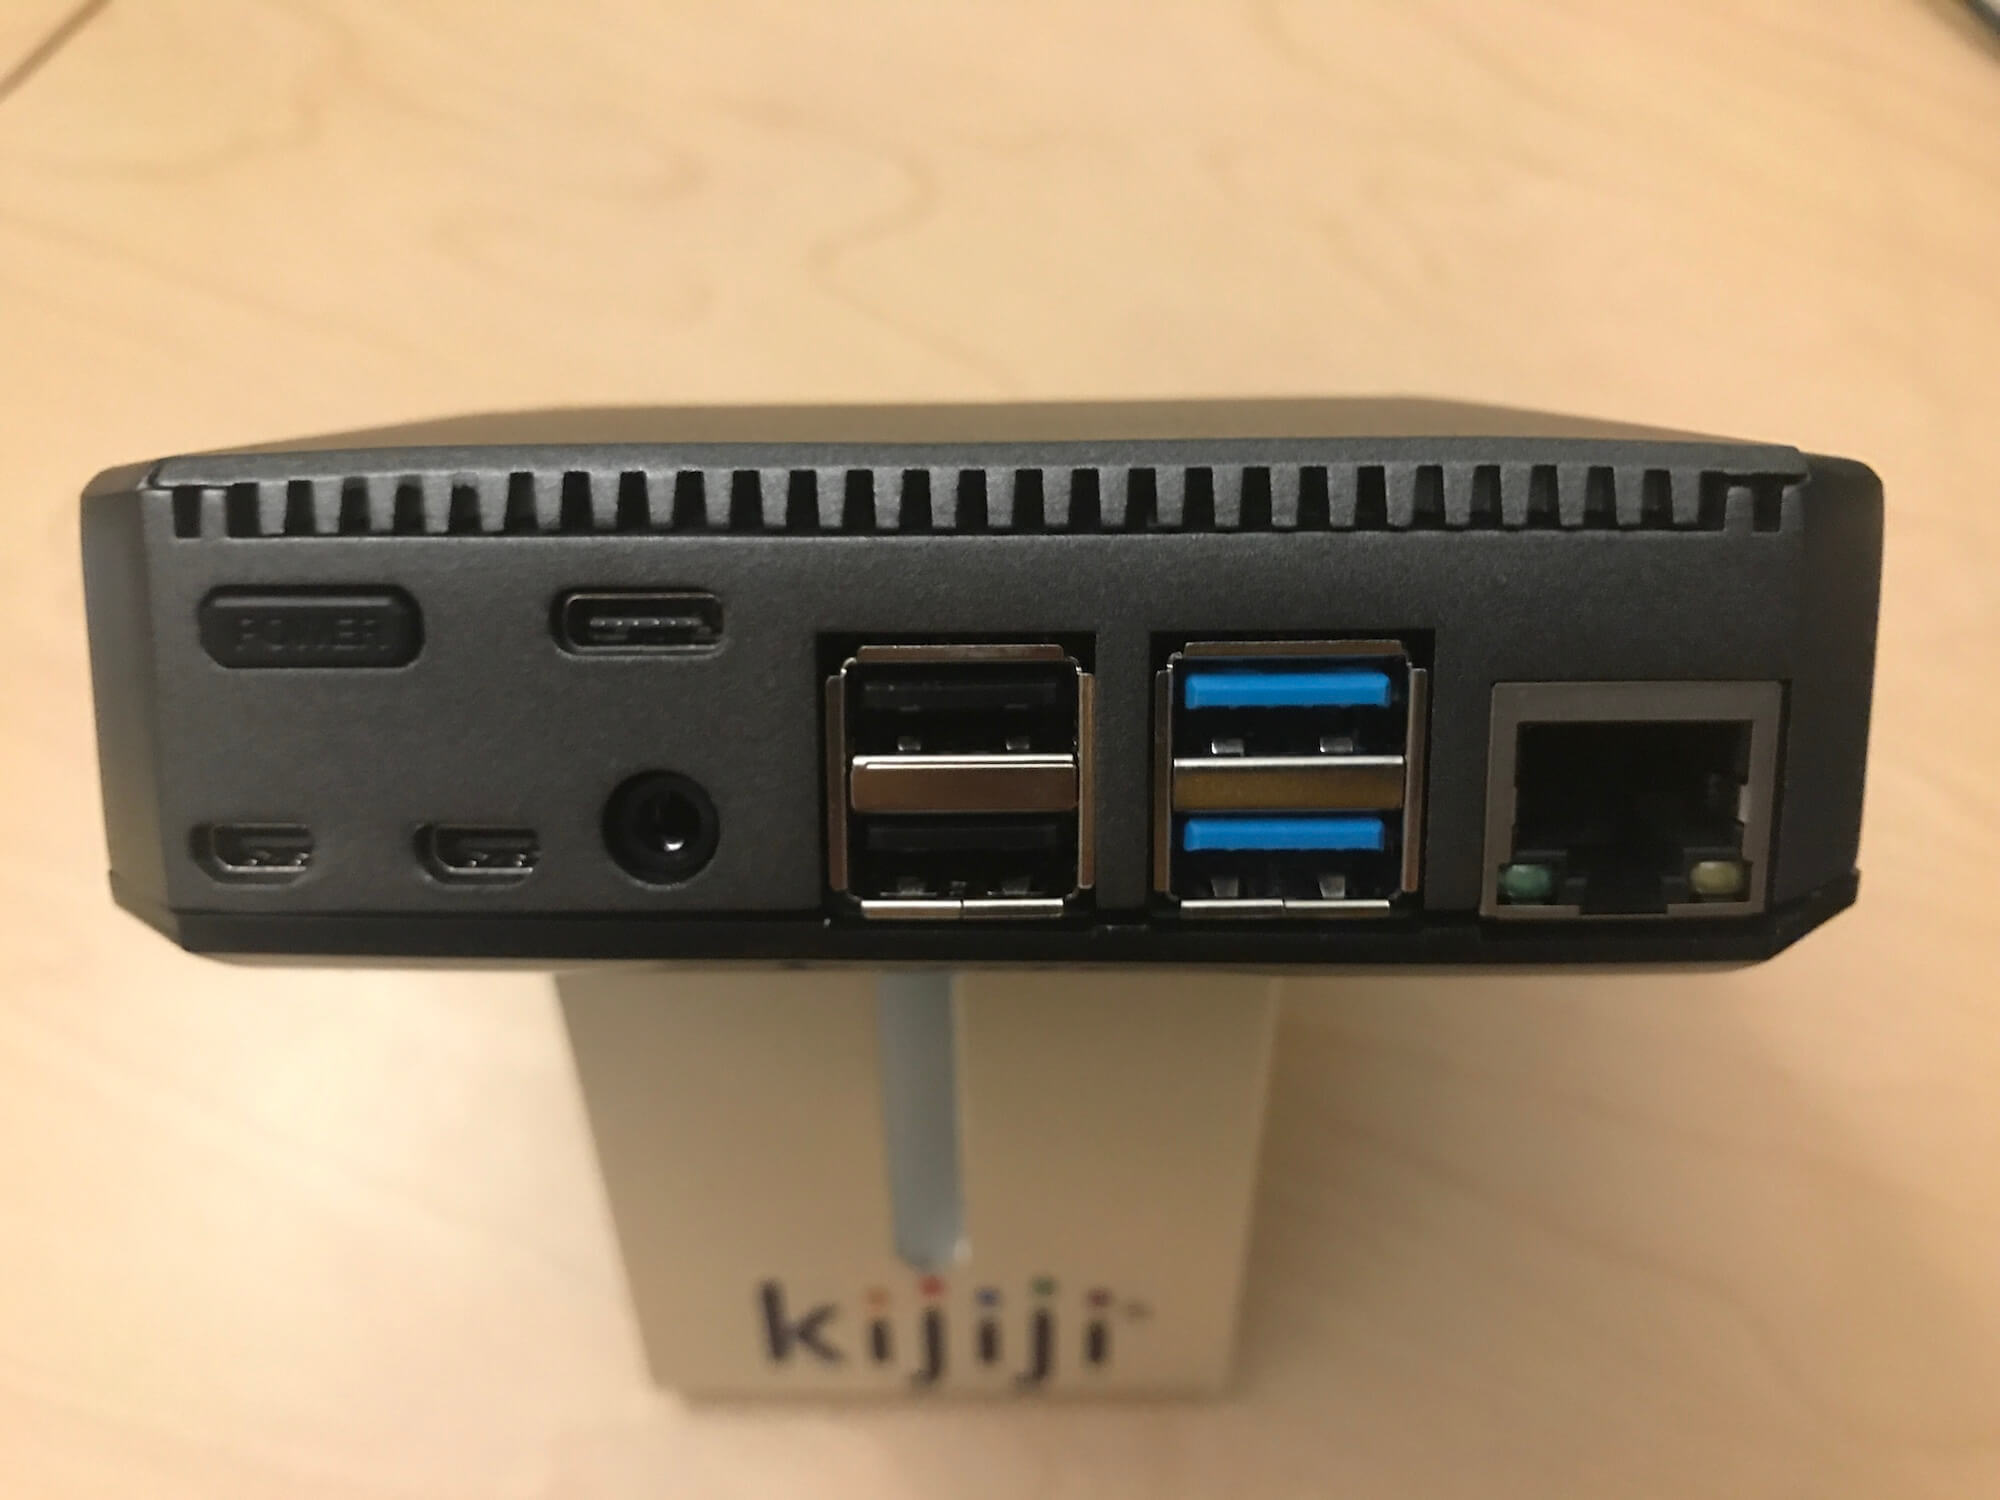 Arrangement of ports and power button